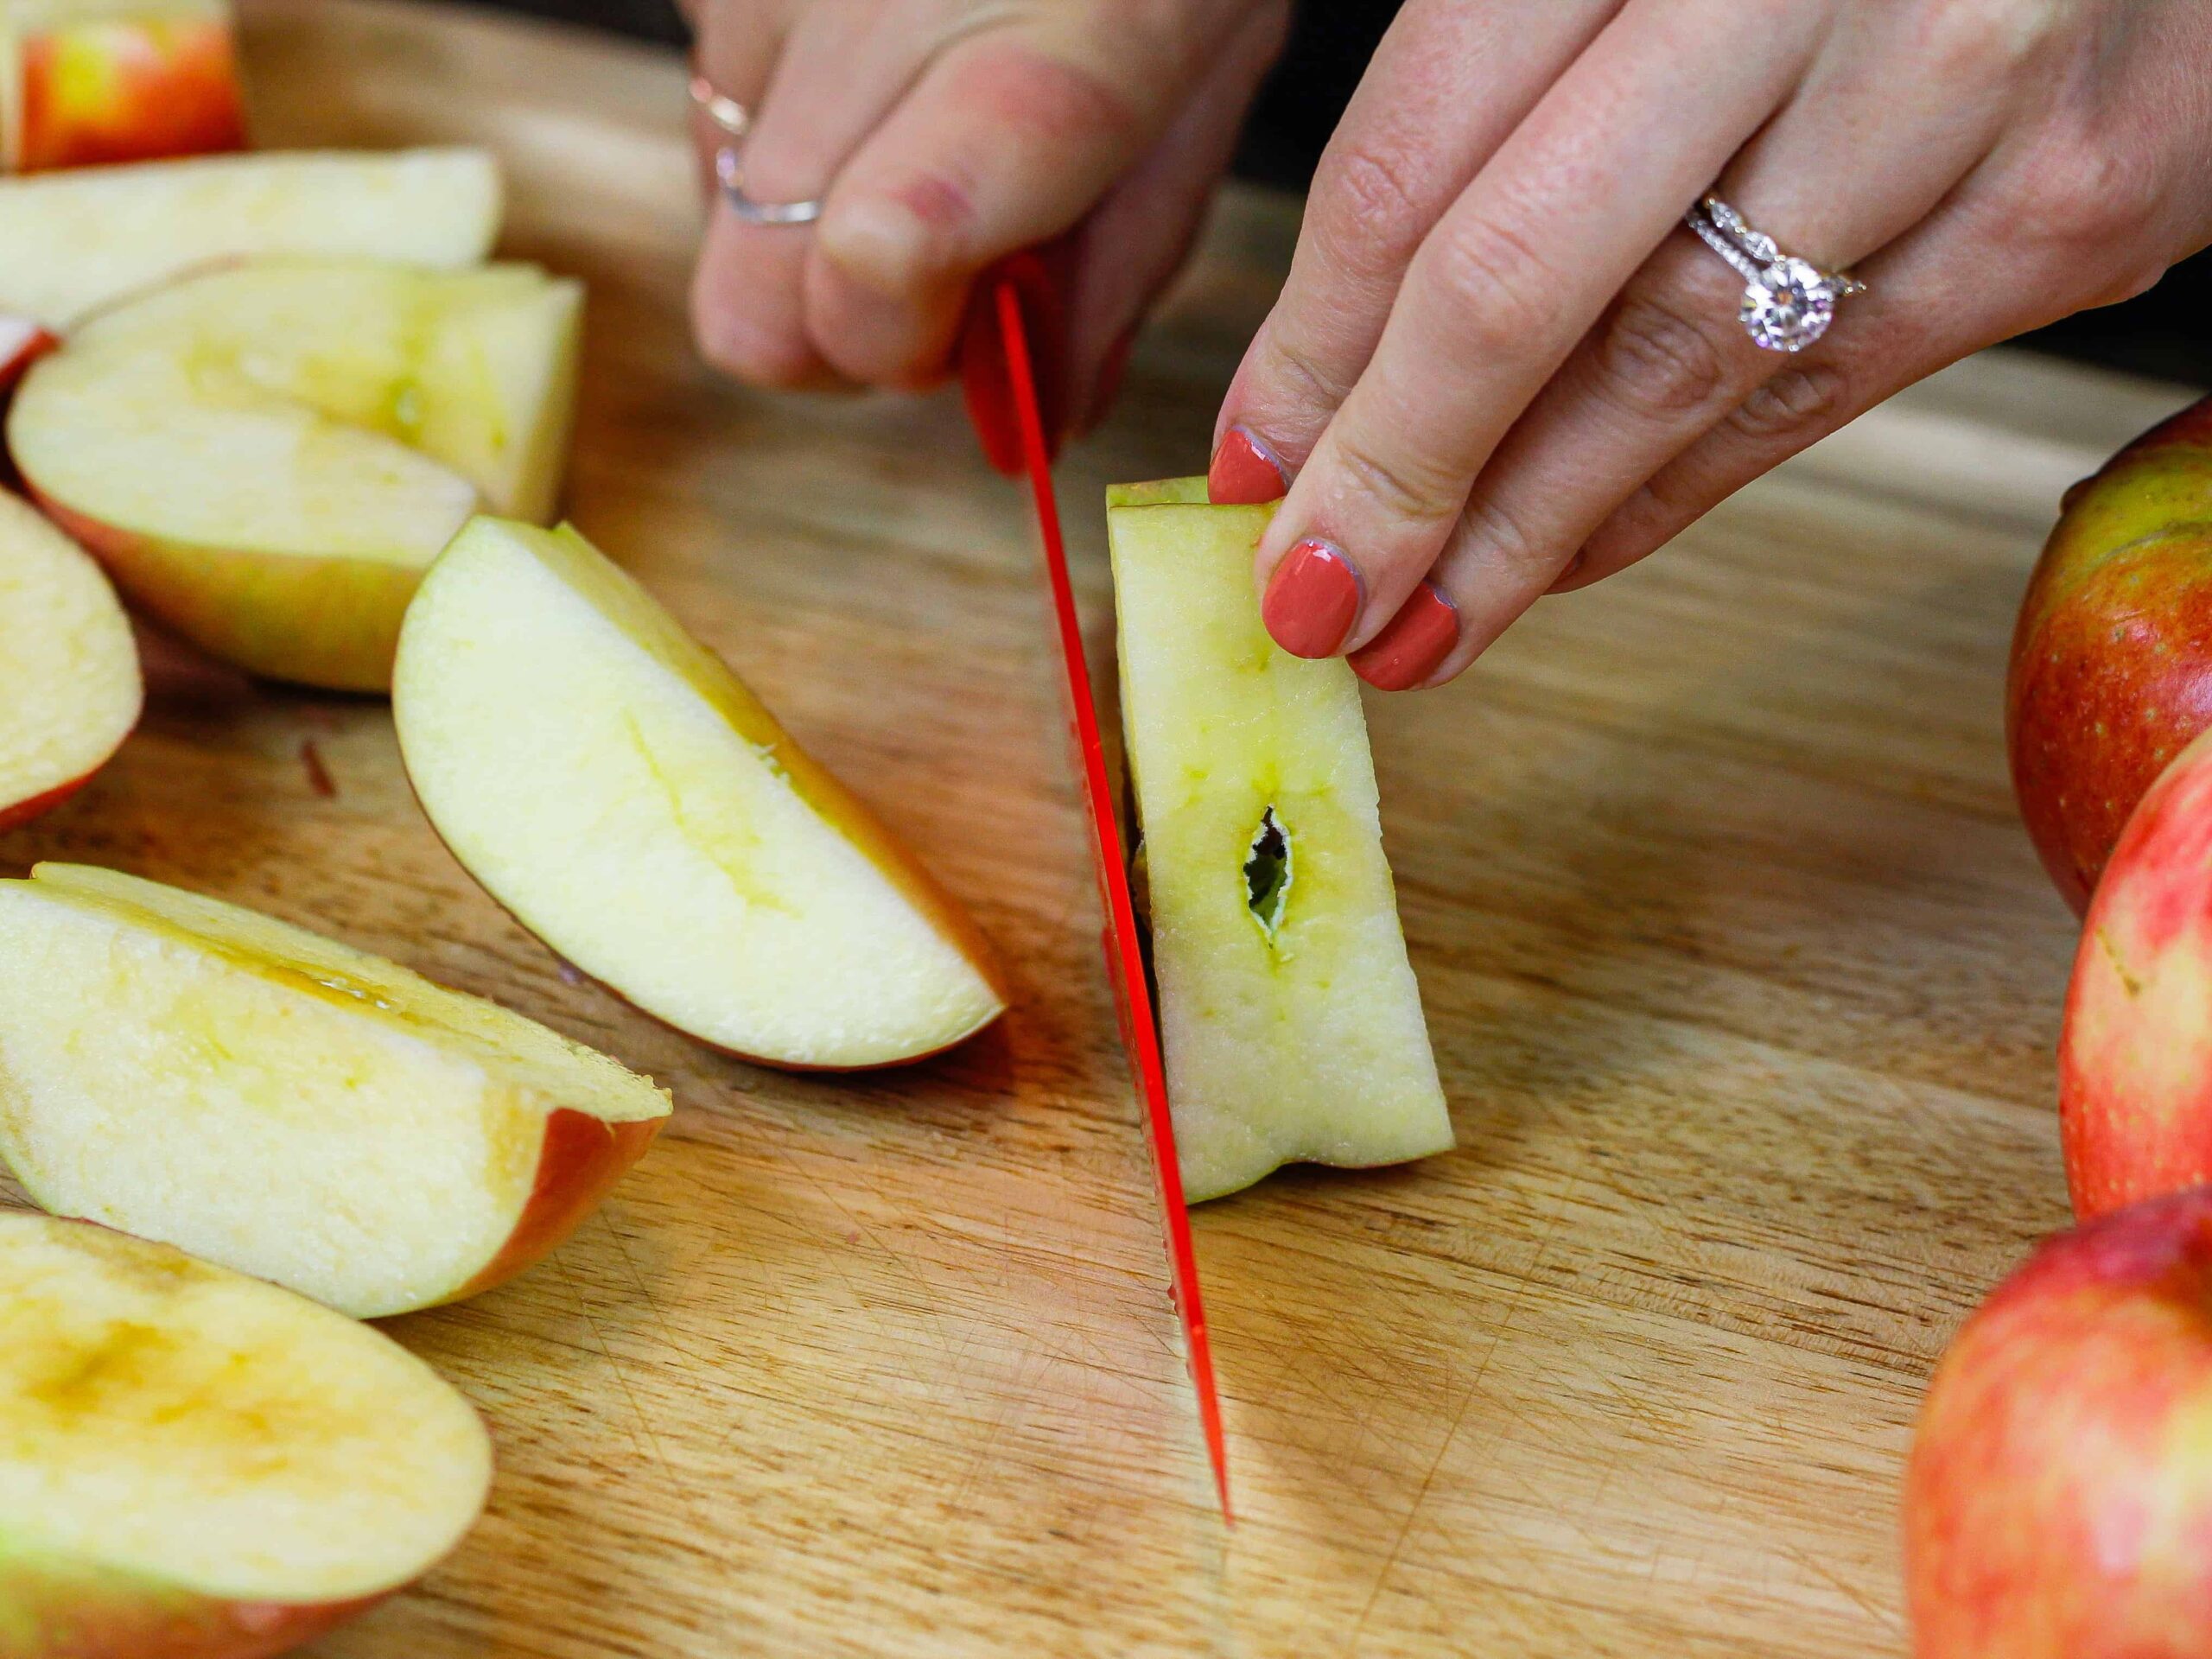 image of apples being cut into quarters to make apple butter